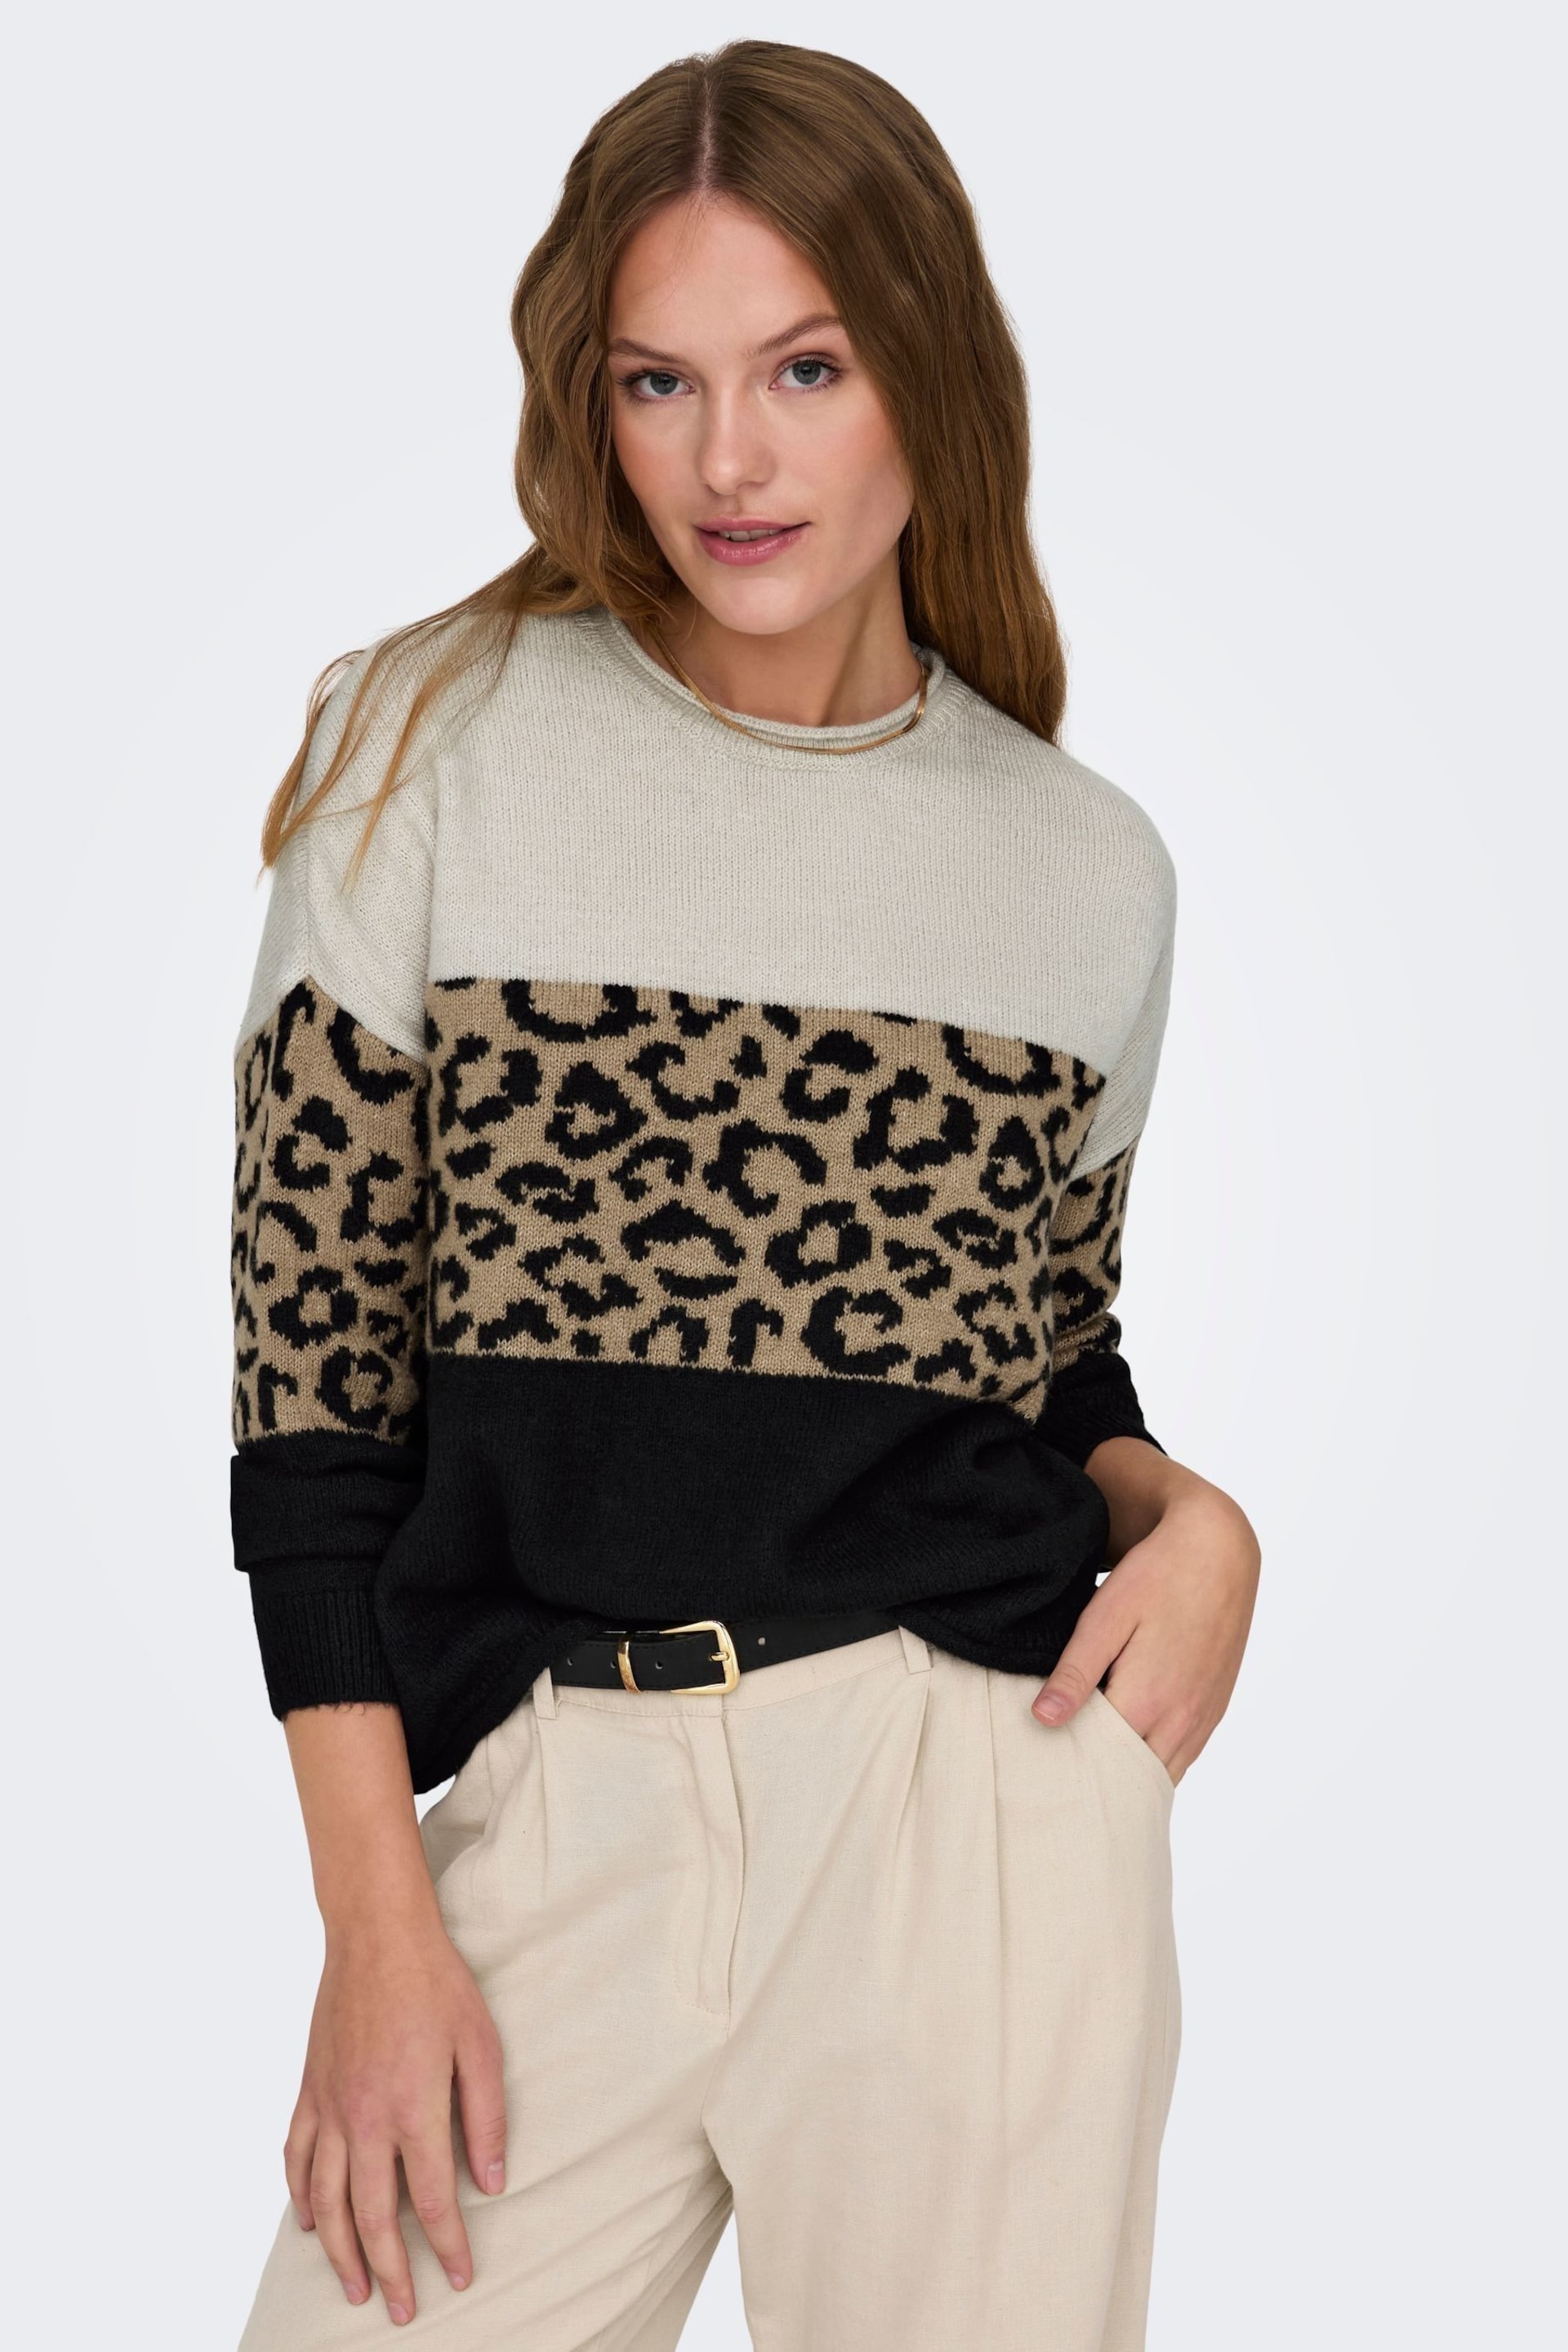 ONLY Cream Leopard Print Colourblock Knitted Jumper - Image 3 of 5